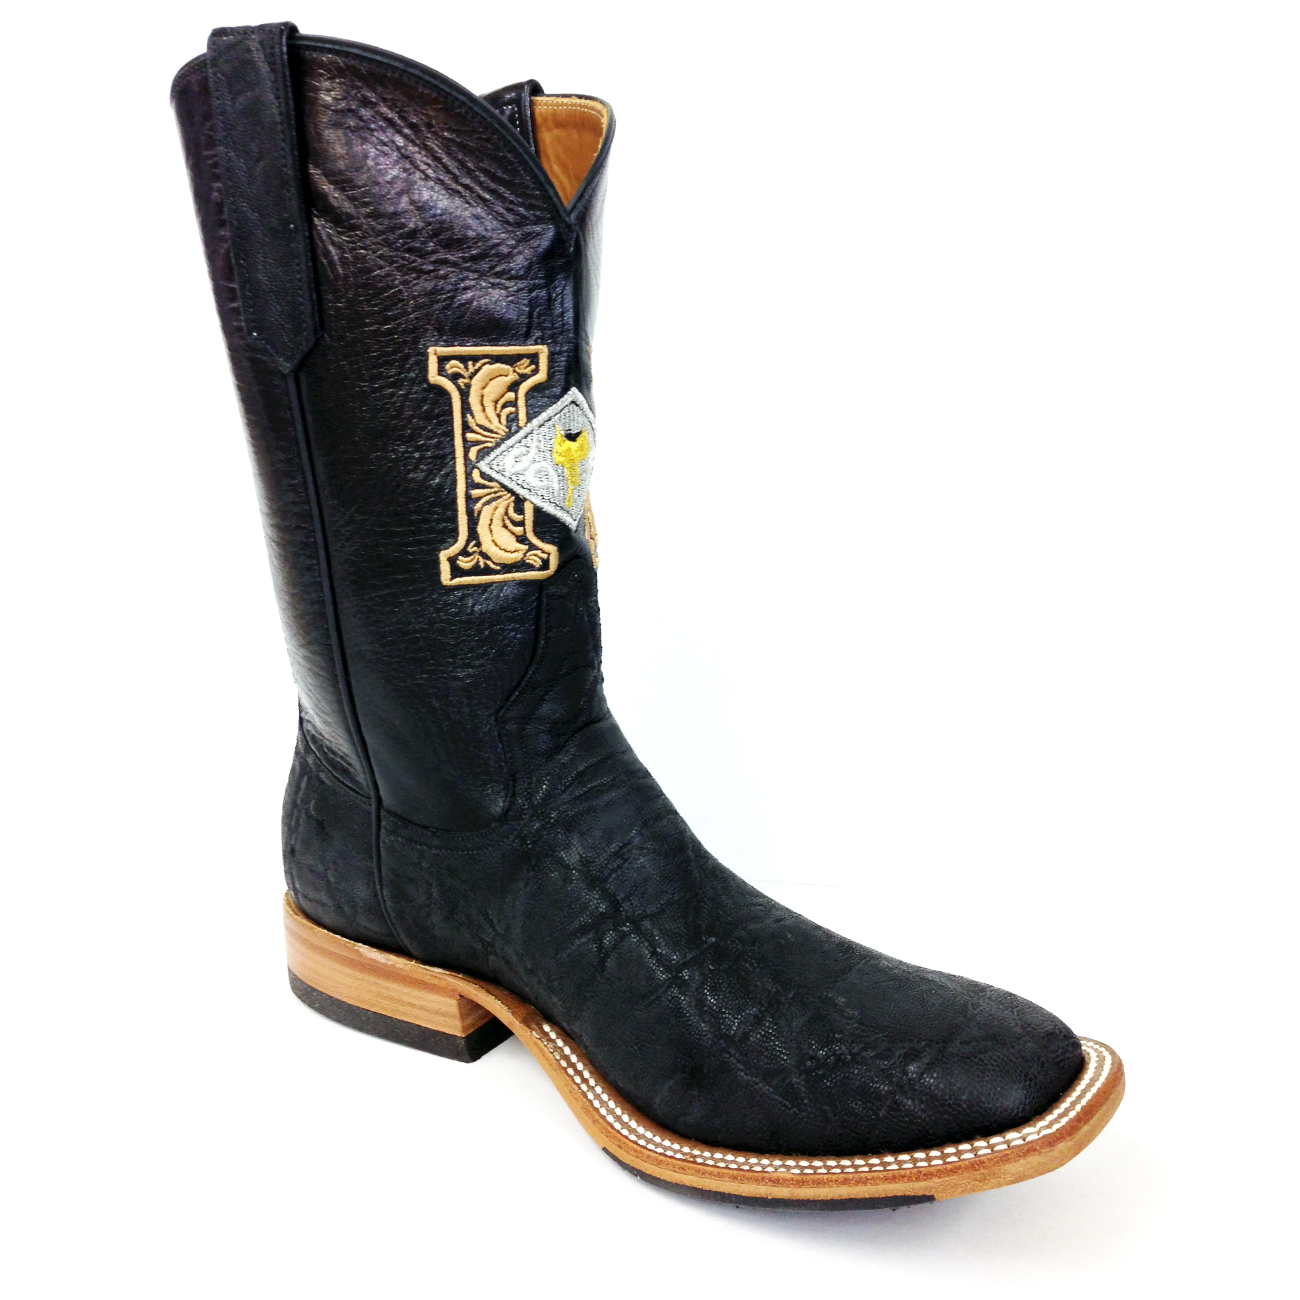 Buy > elephant leather boots > in stock